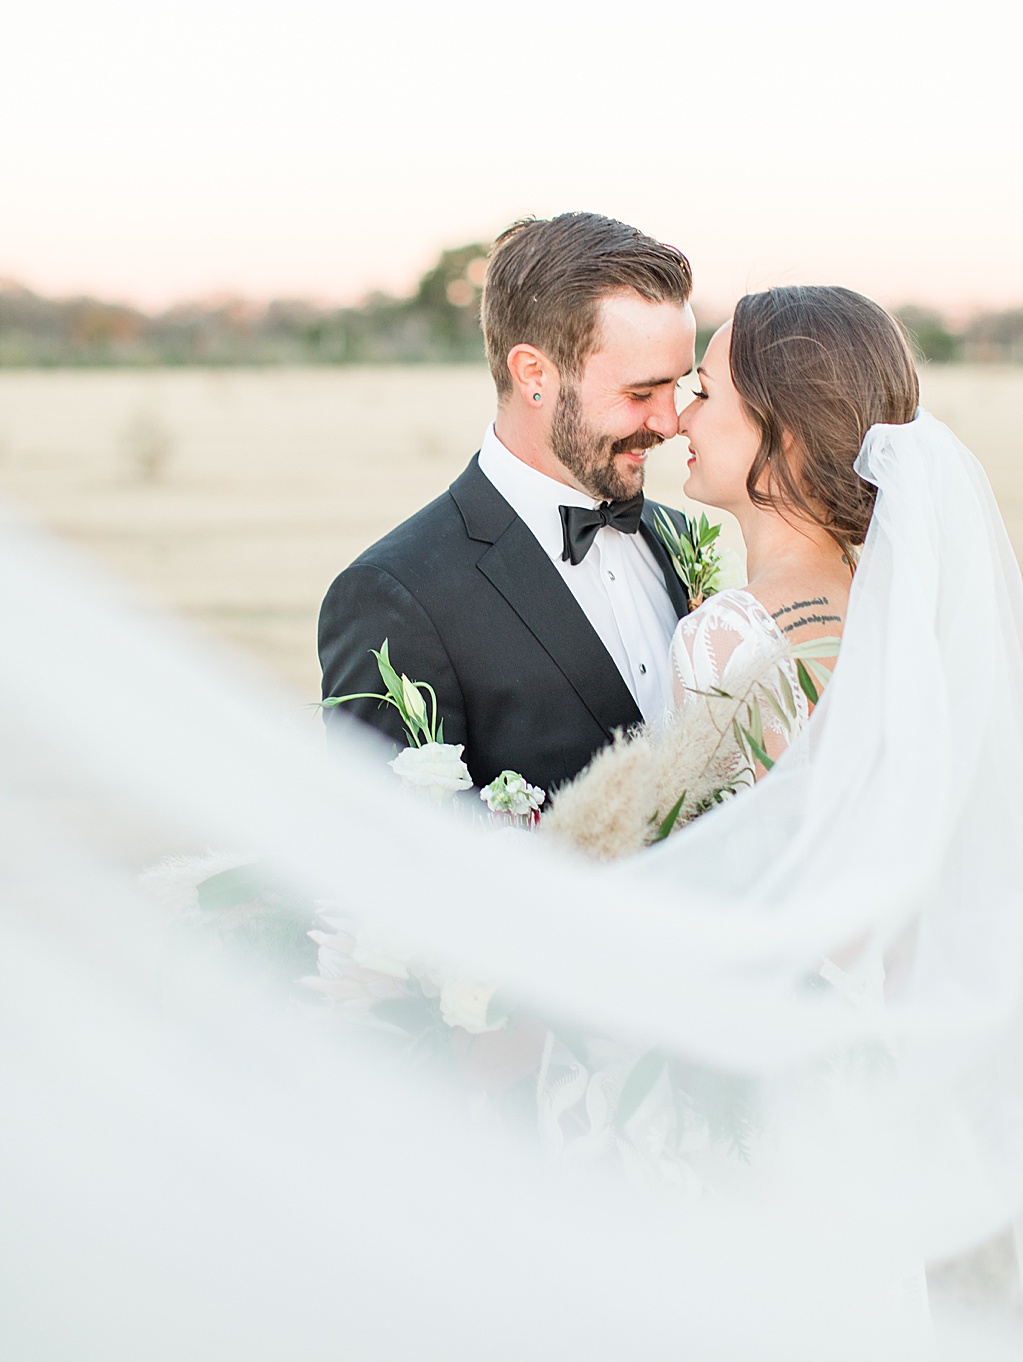 Hill Country Wedding at Turtle Creek Olive Grove wedding venue in Kerrville Texas by Wedding Photographer Allison Jeffers 0105